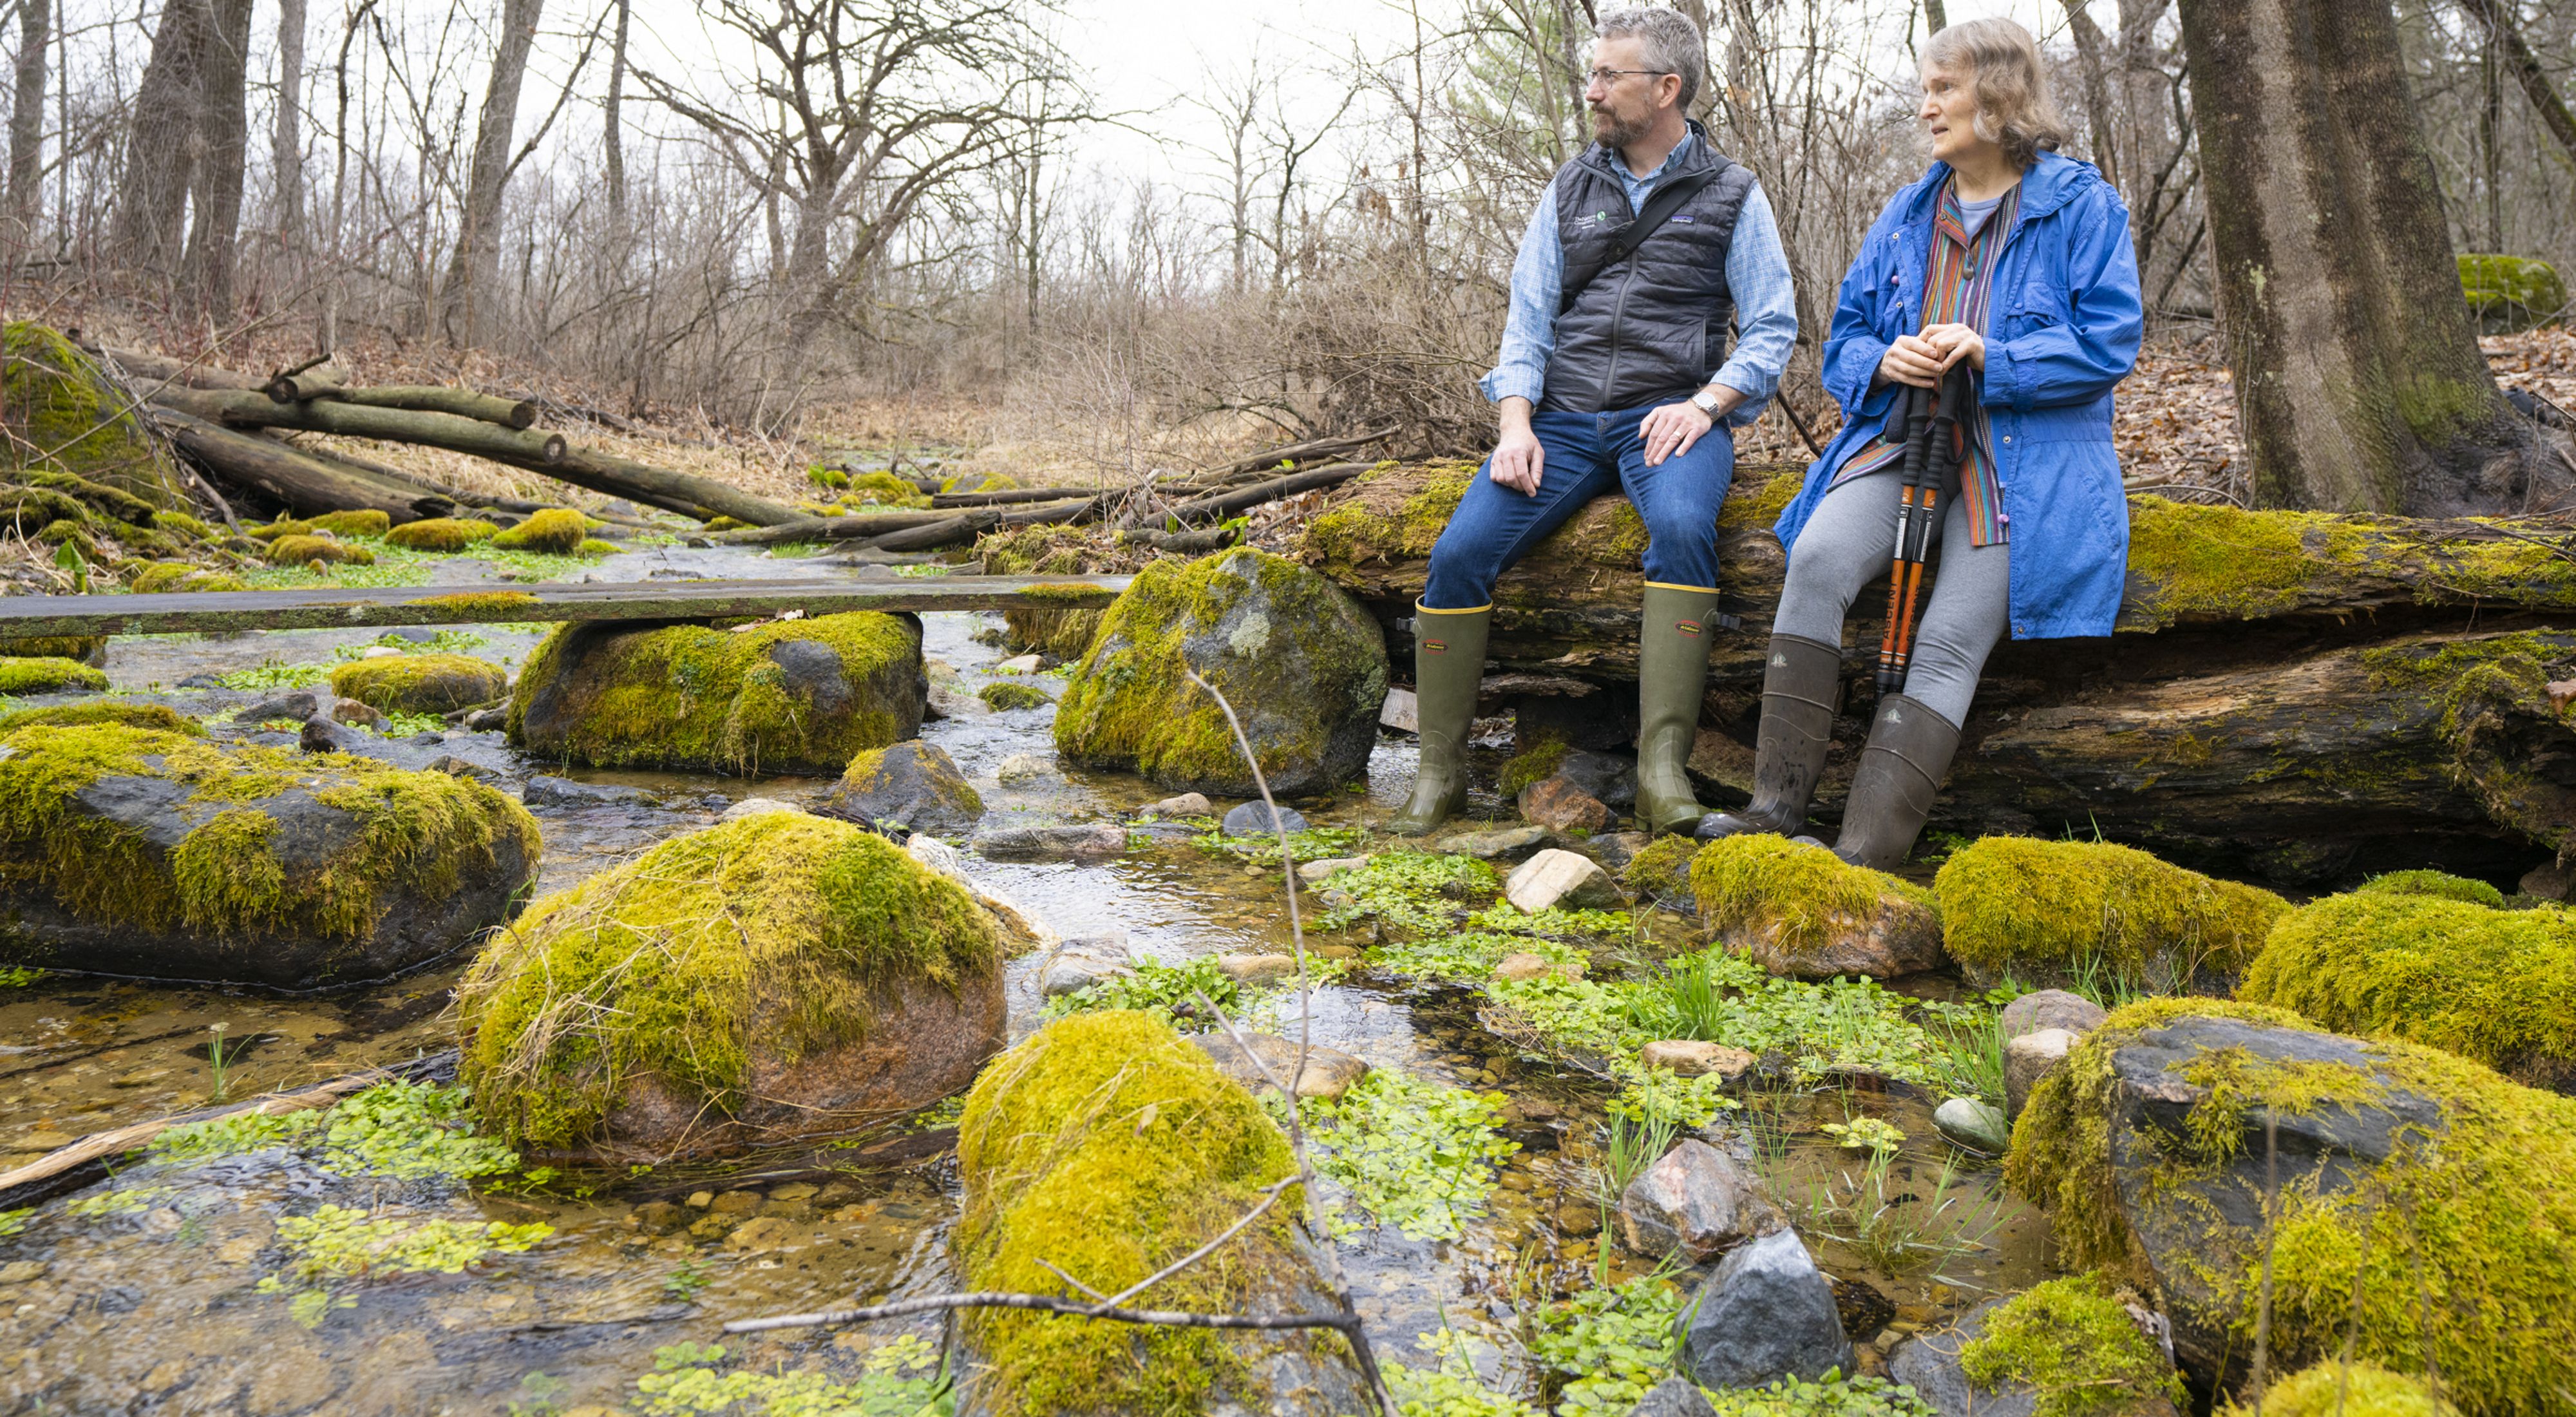 A man and woman in knee-high rubber boots sit on a log with their feet in a shallow, rocky stream.